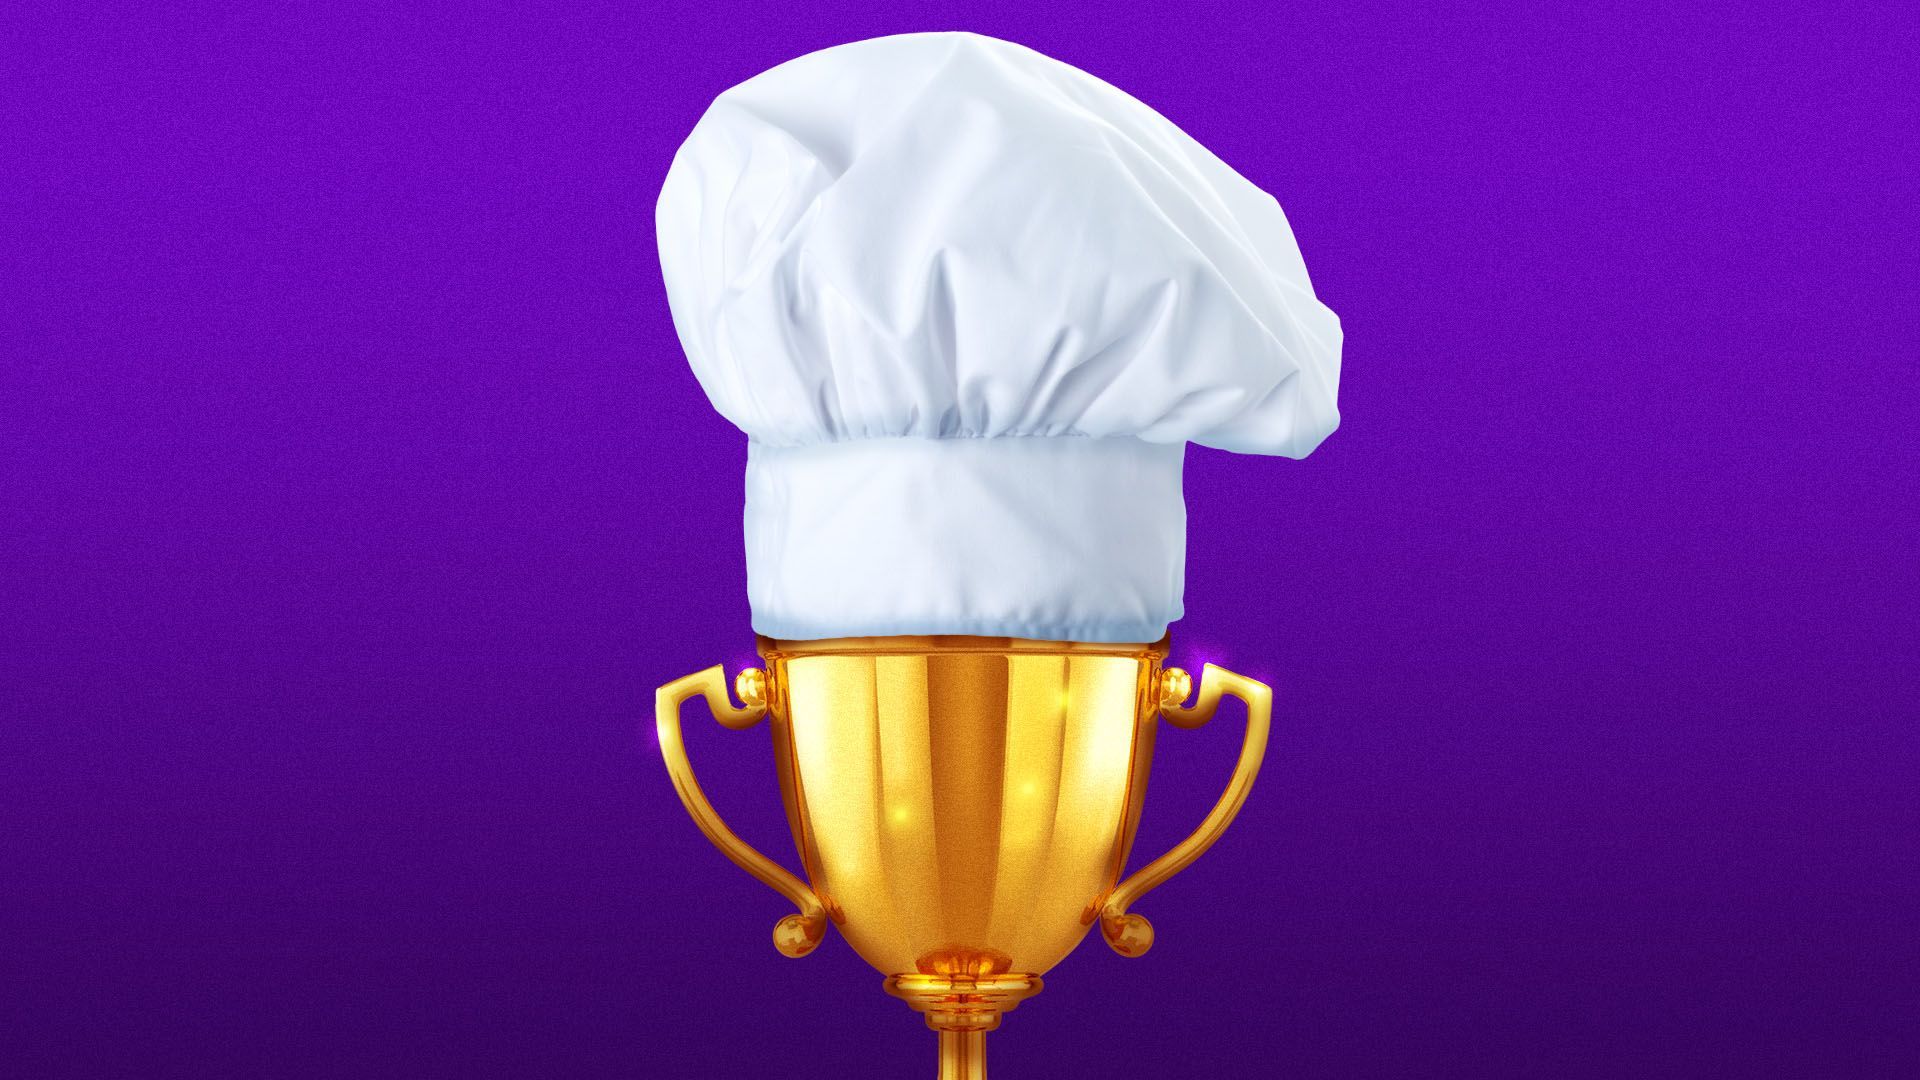 Illustration of a trophy wearing a chef's hat